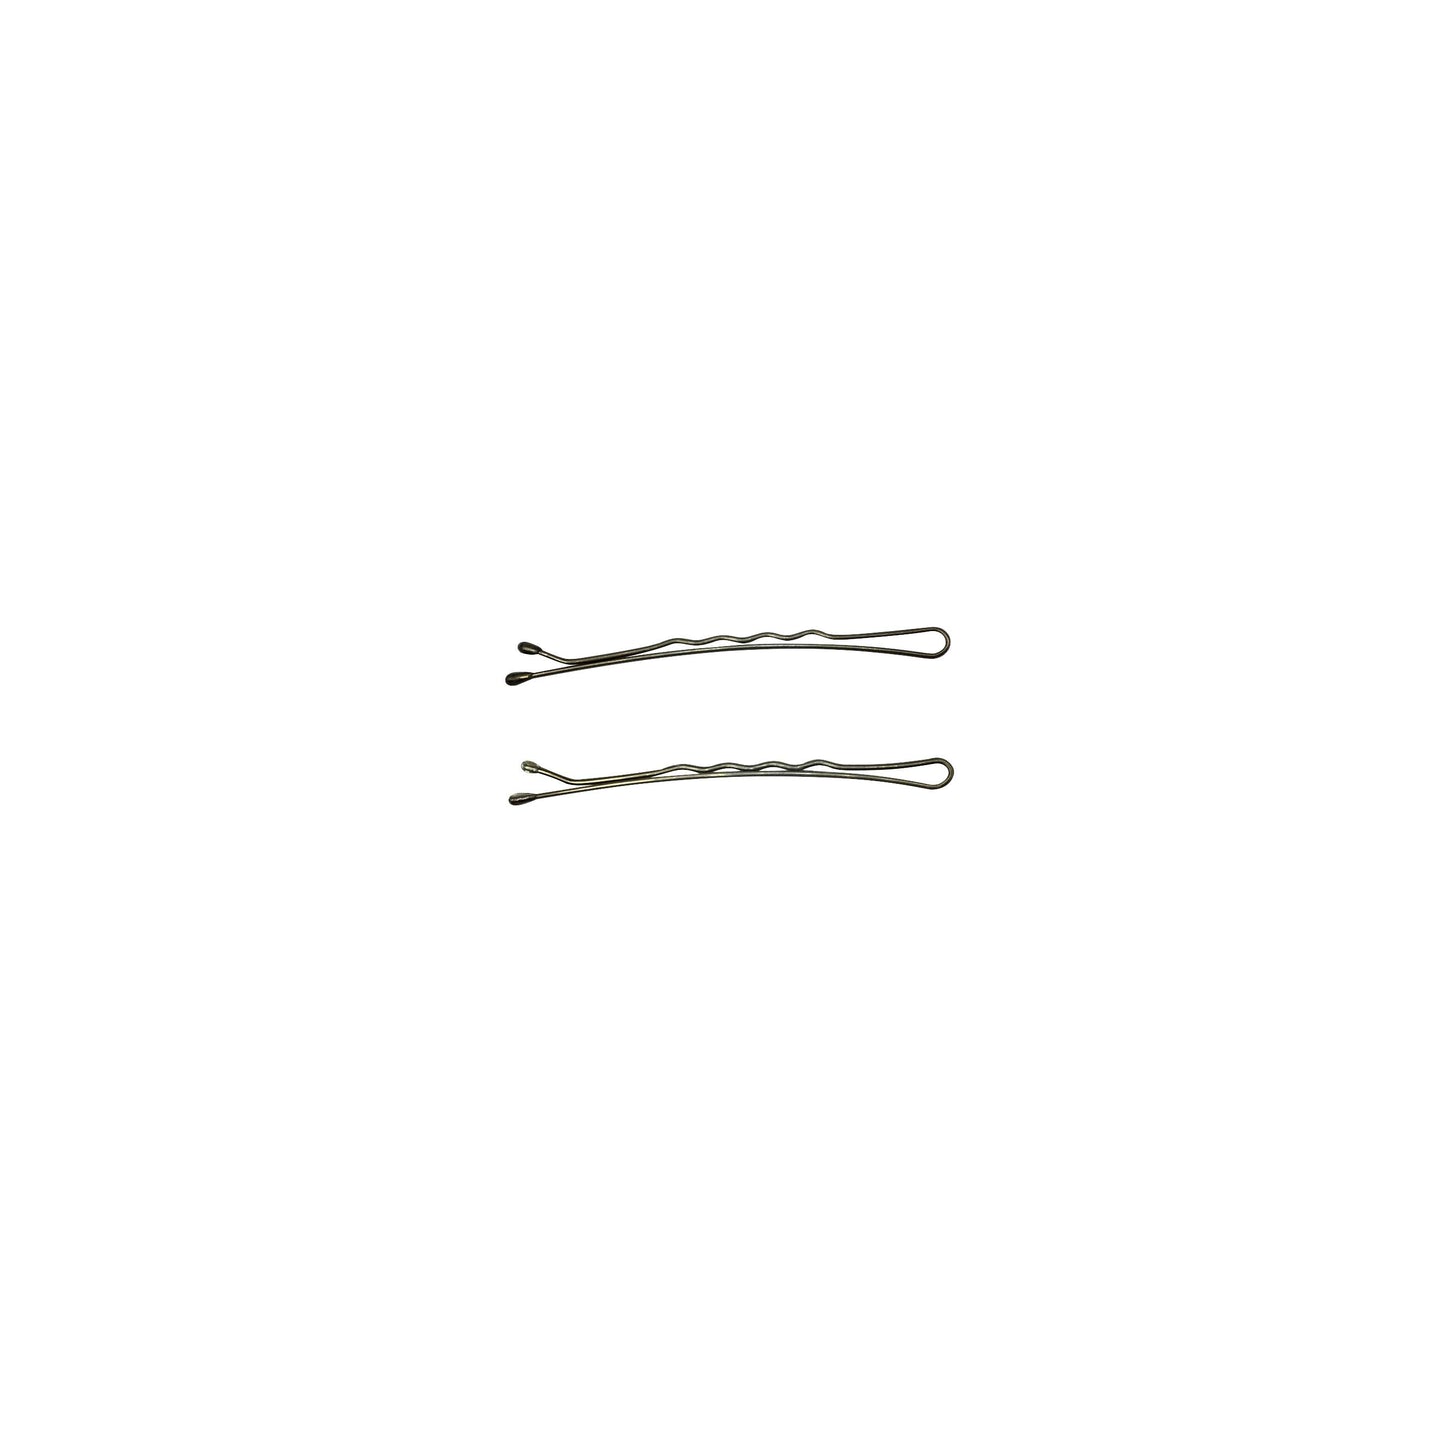 280, Brassed Color, 2.4in (6.0cm), Italian Made Bobby Pins, Recloseable Stay Clean and Organized Container